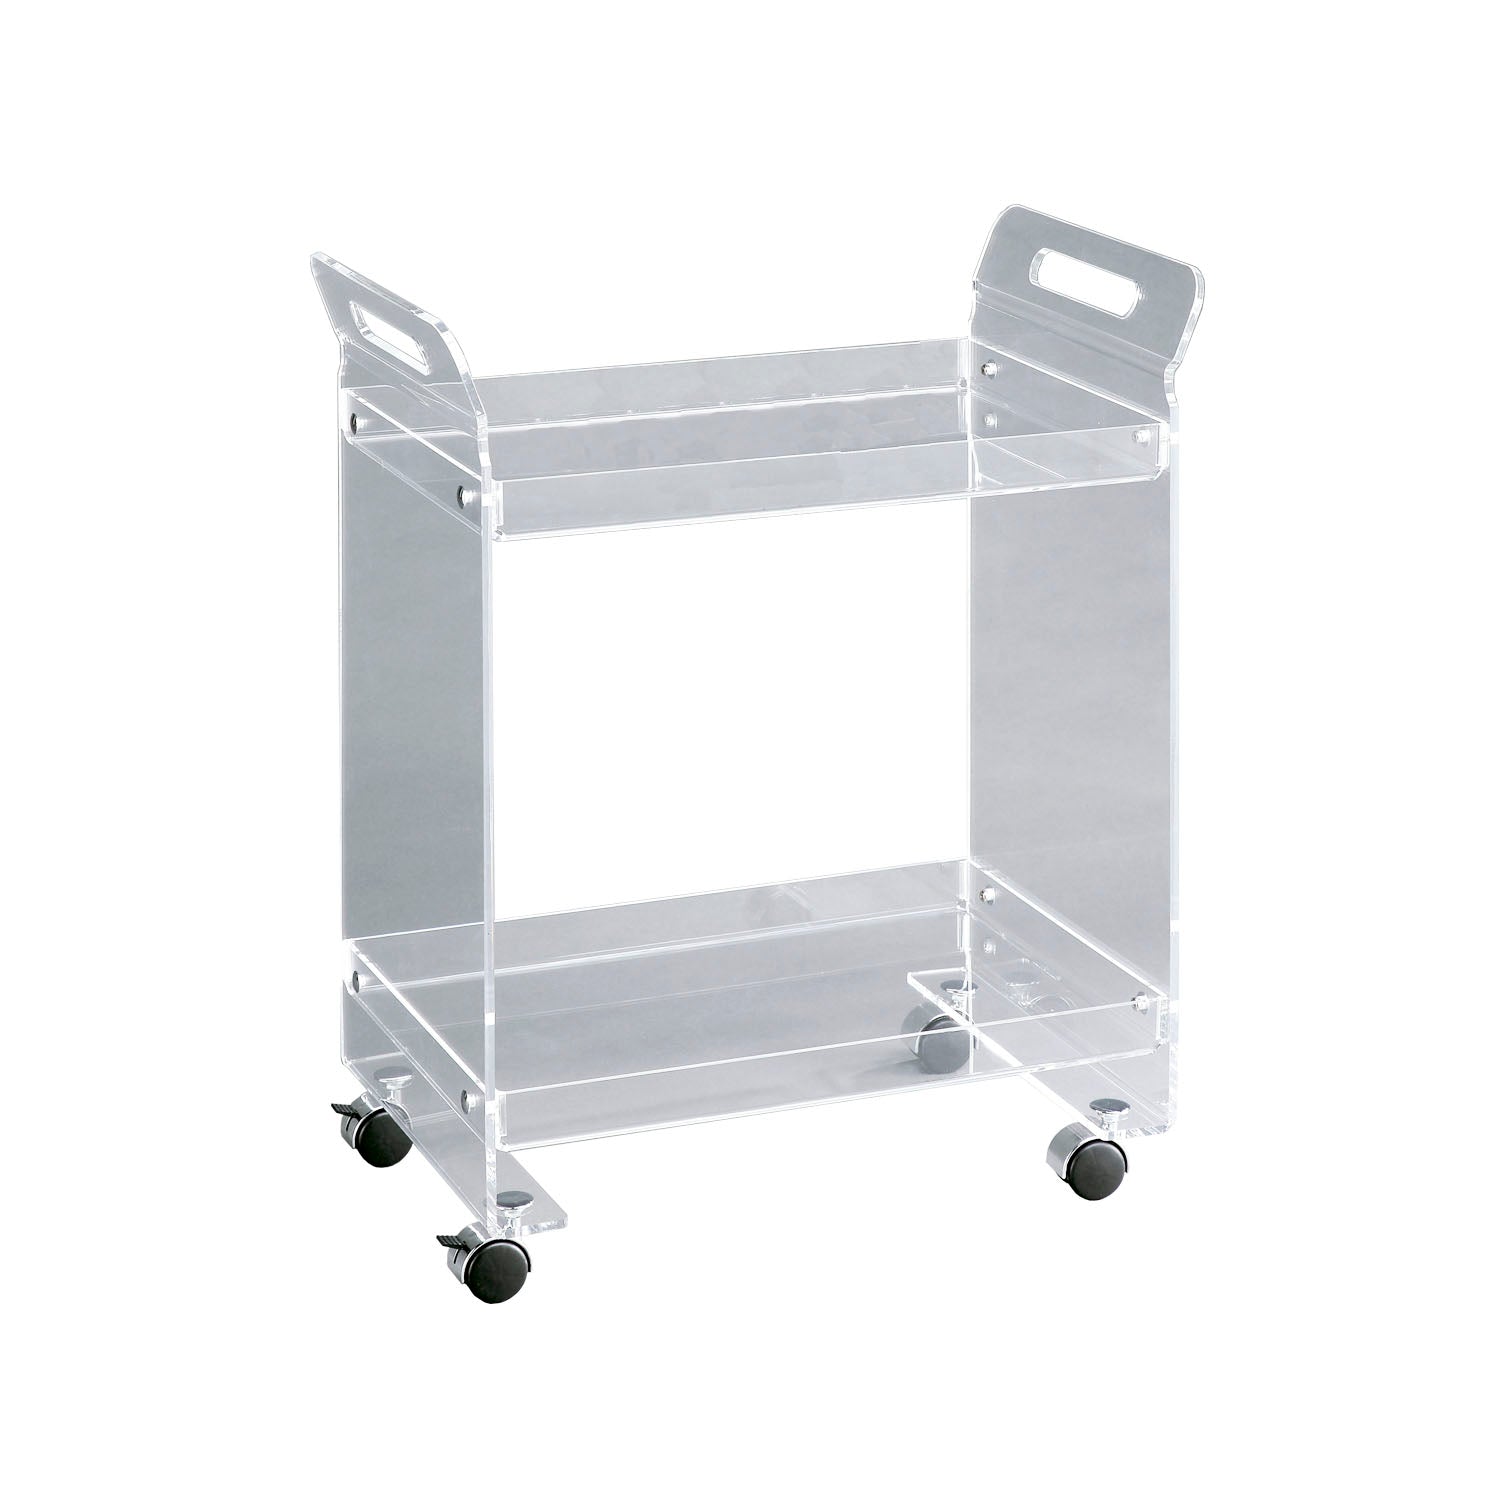 TWO LEVEL ACRYLIC ROLLING BAR CART